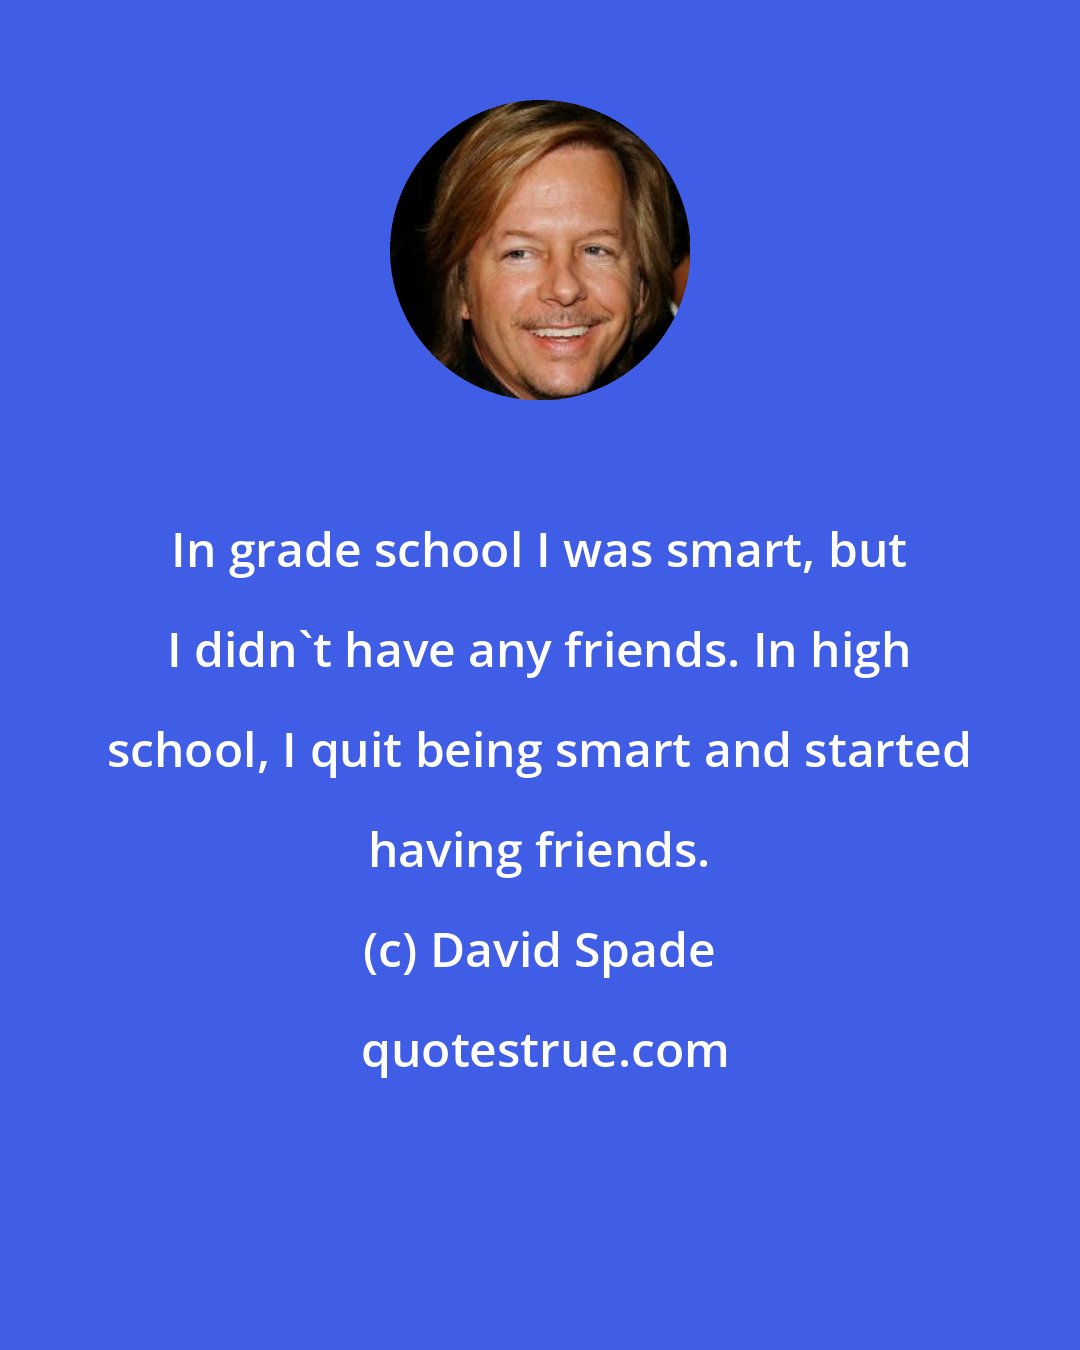 David Spade: In grade school I was smart, but I didn't have any friends. In high school, I quit being smart and started having friends.